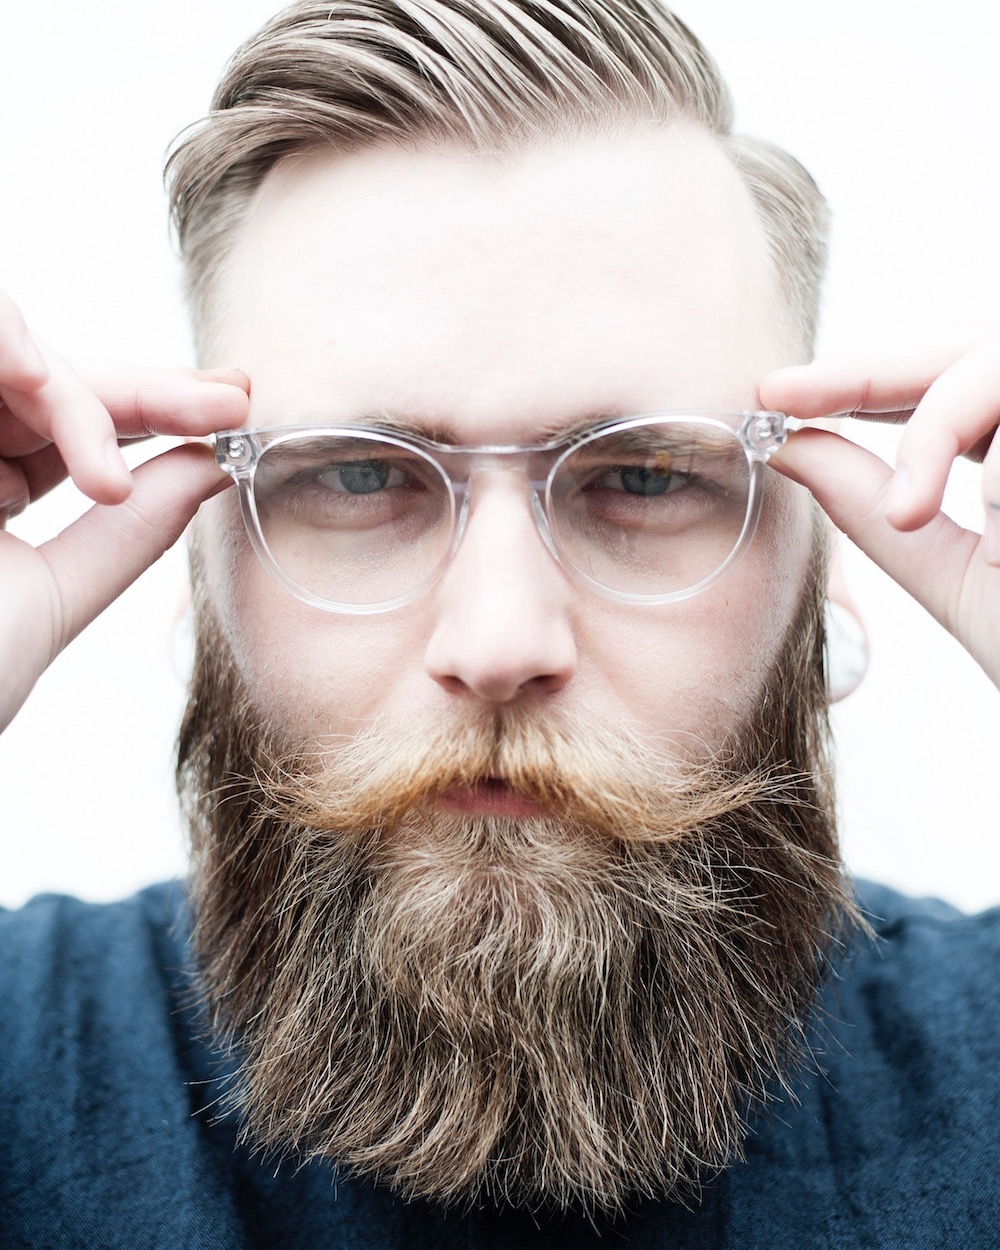 The hipster wedge beard style